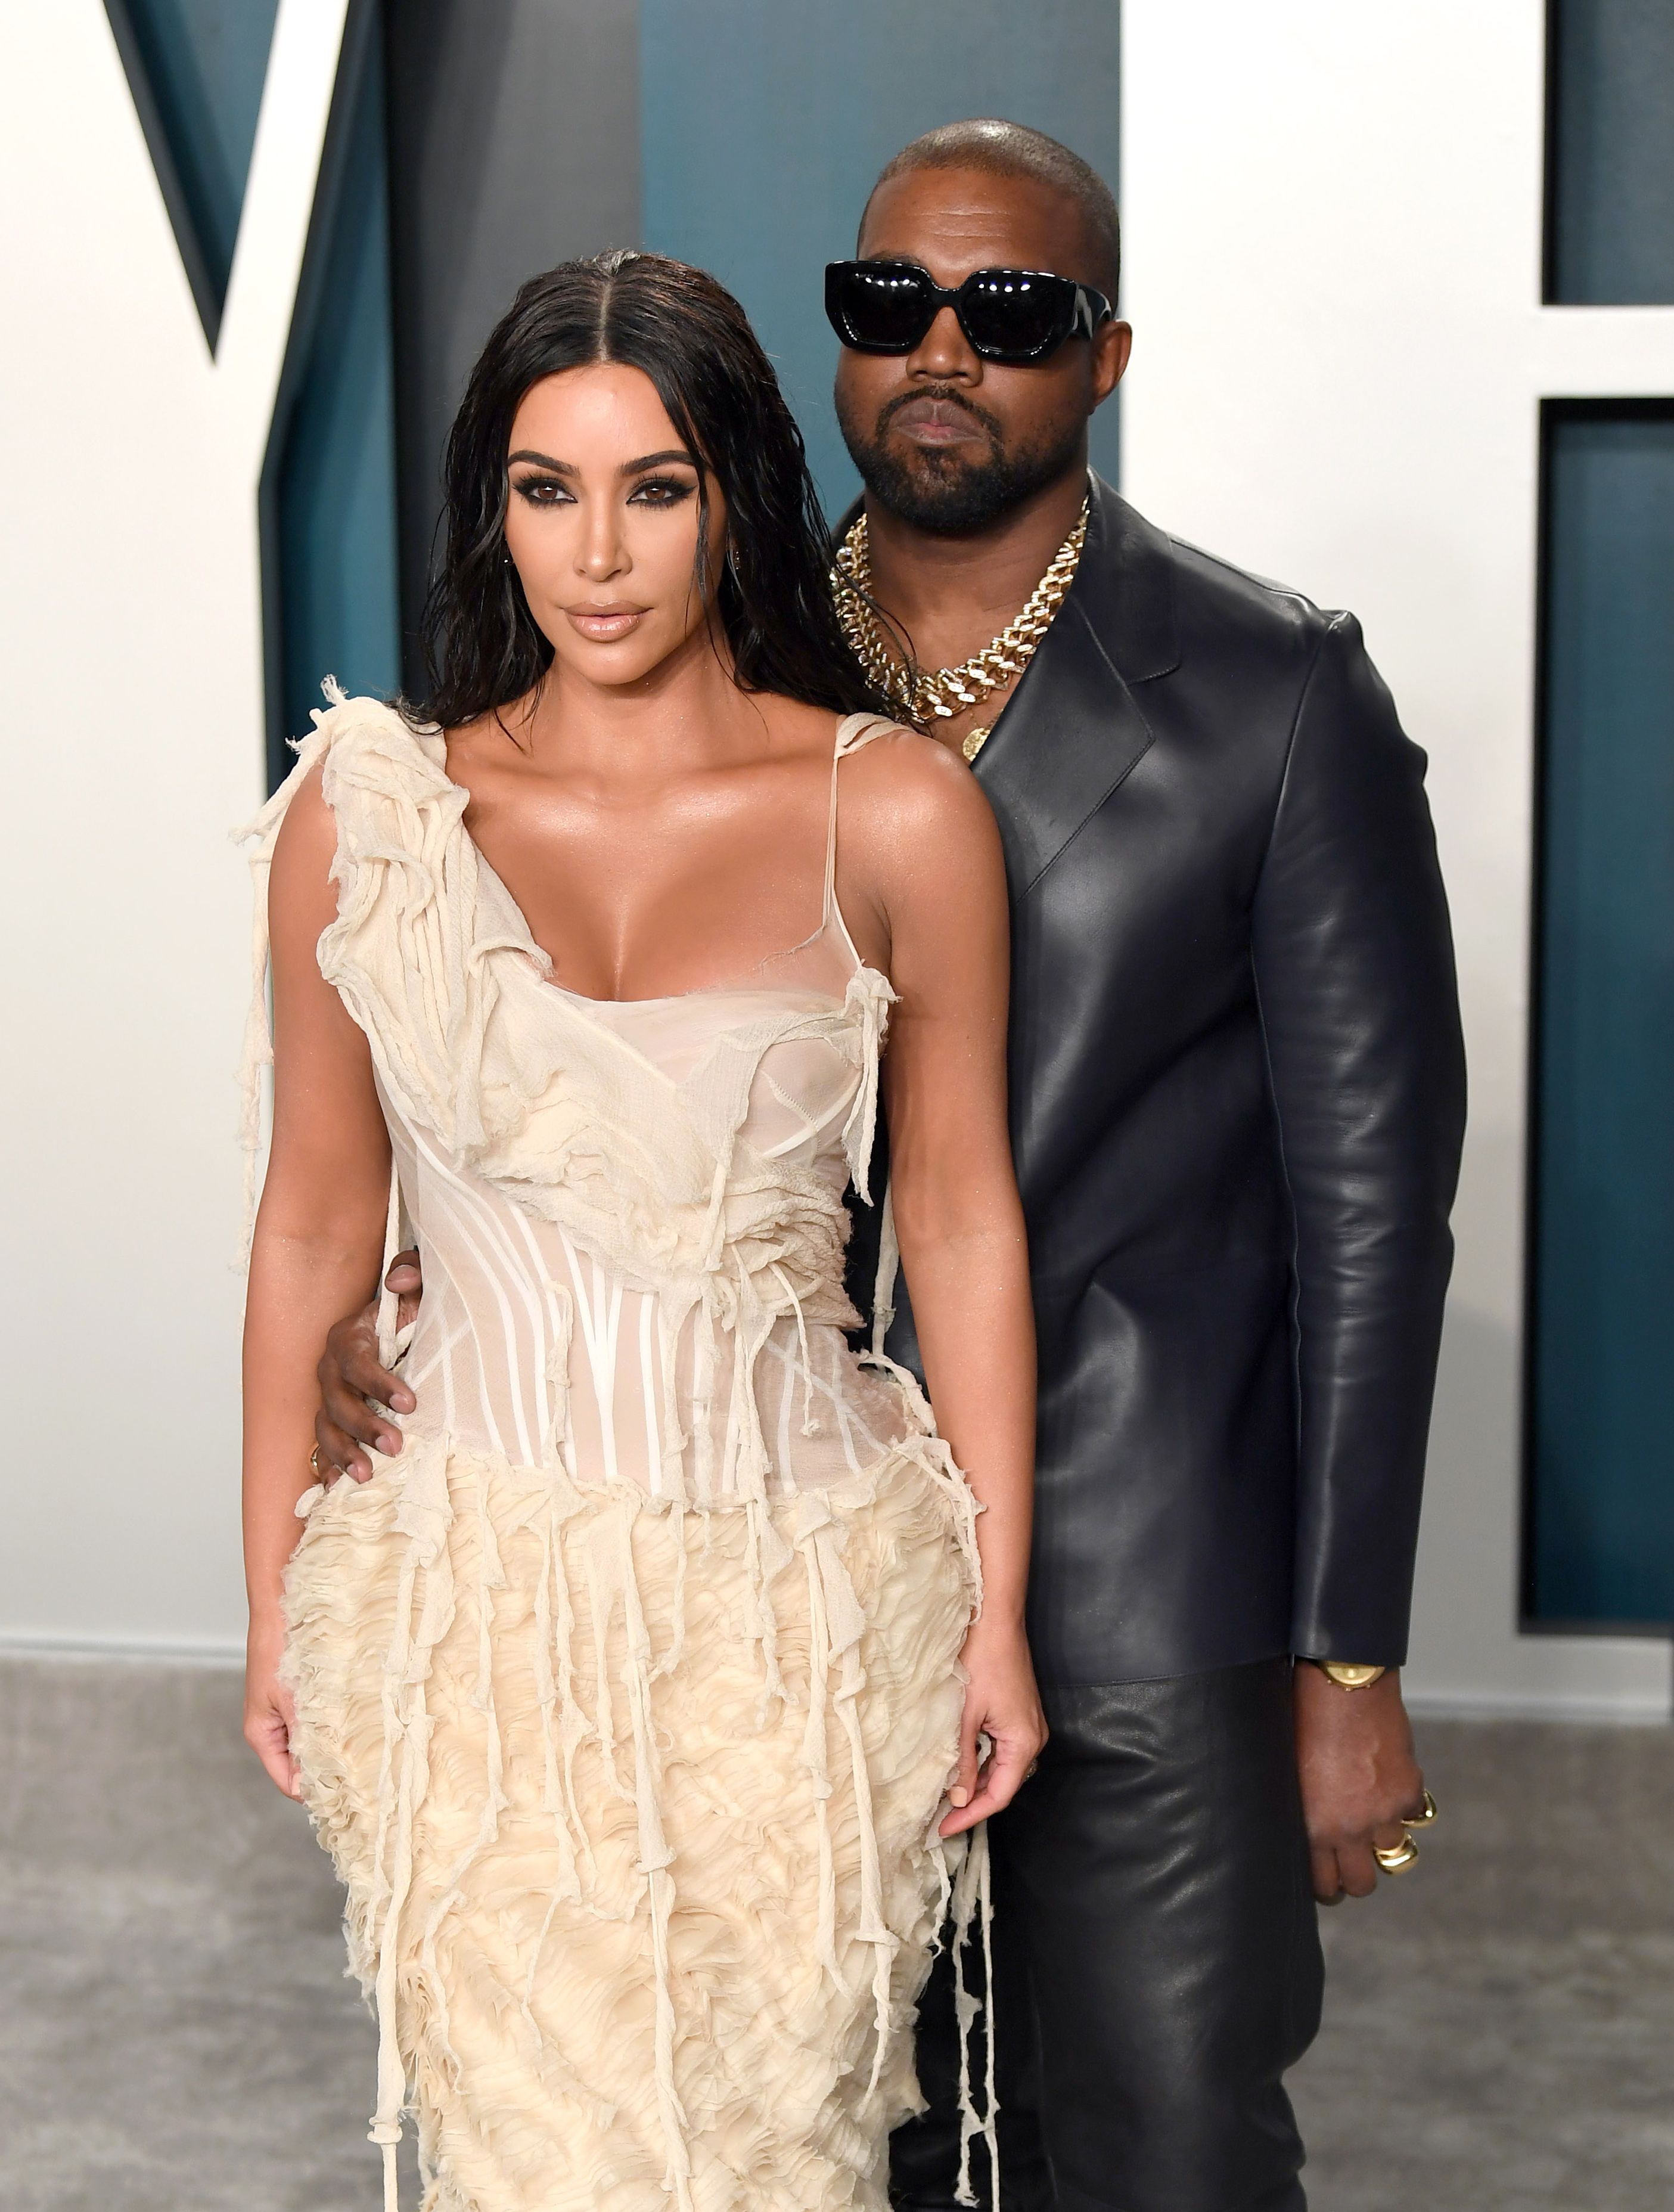 Fans are calling out Kim and Kanye over an old resurfaced KUWTK clip